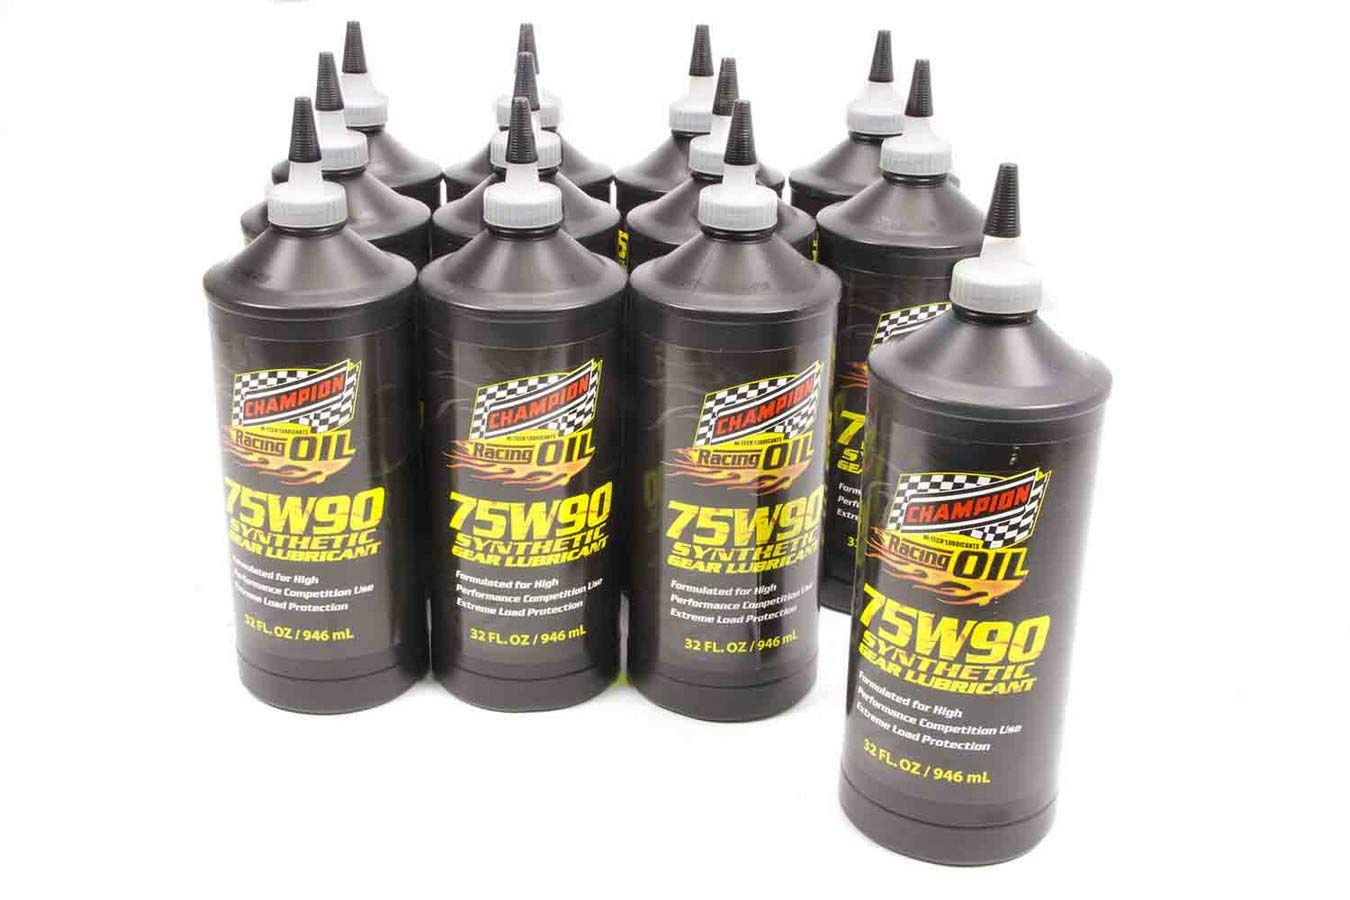 CHAMPION BRAND, 75w90 Synthetic Gear Lube 12x1Qt